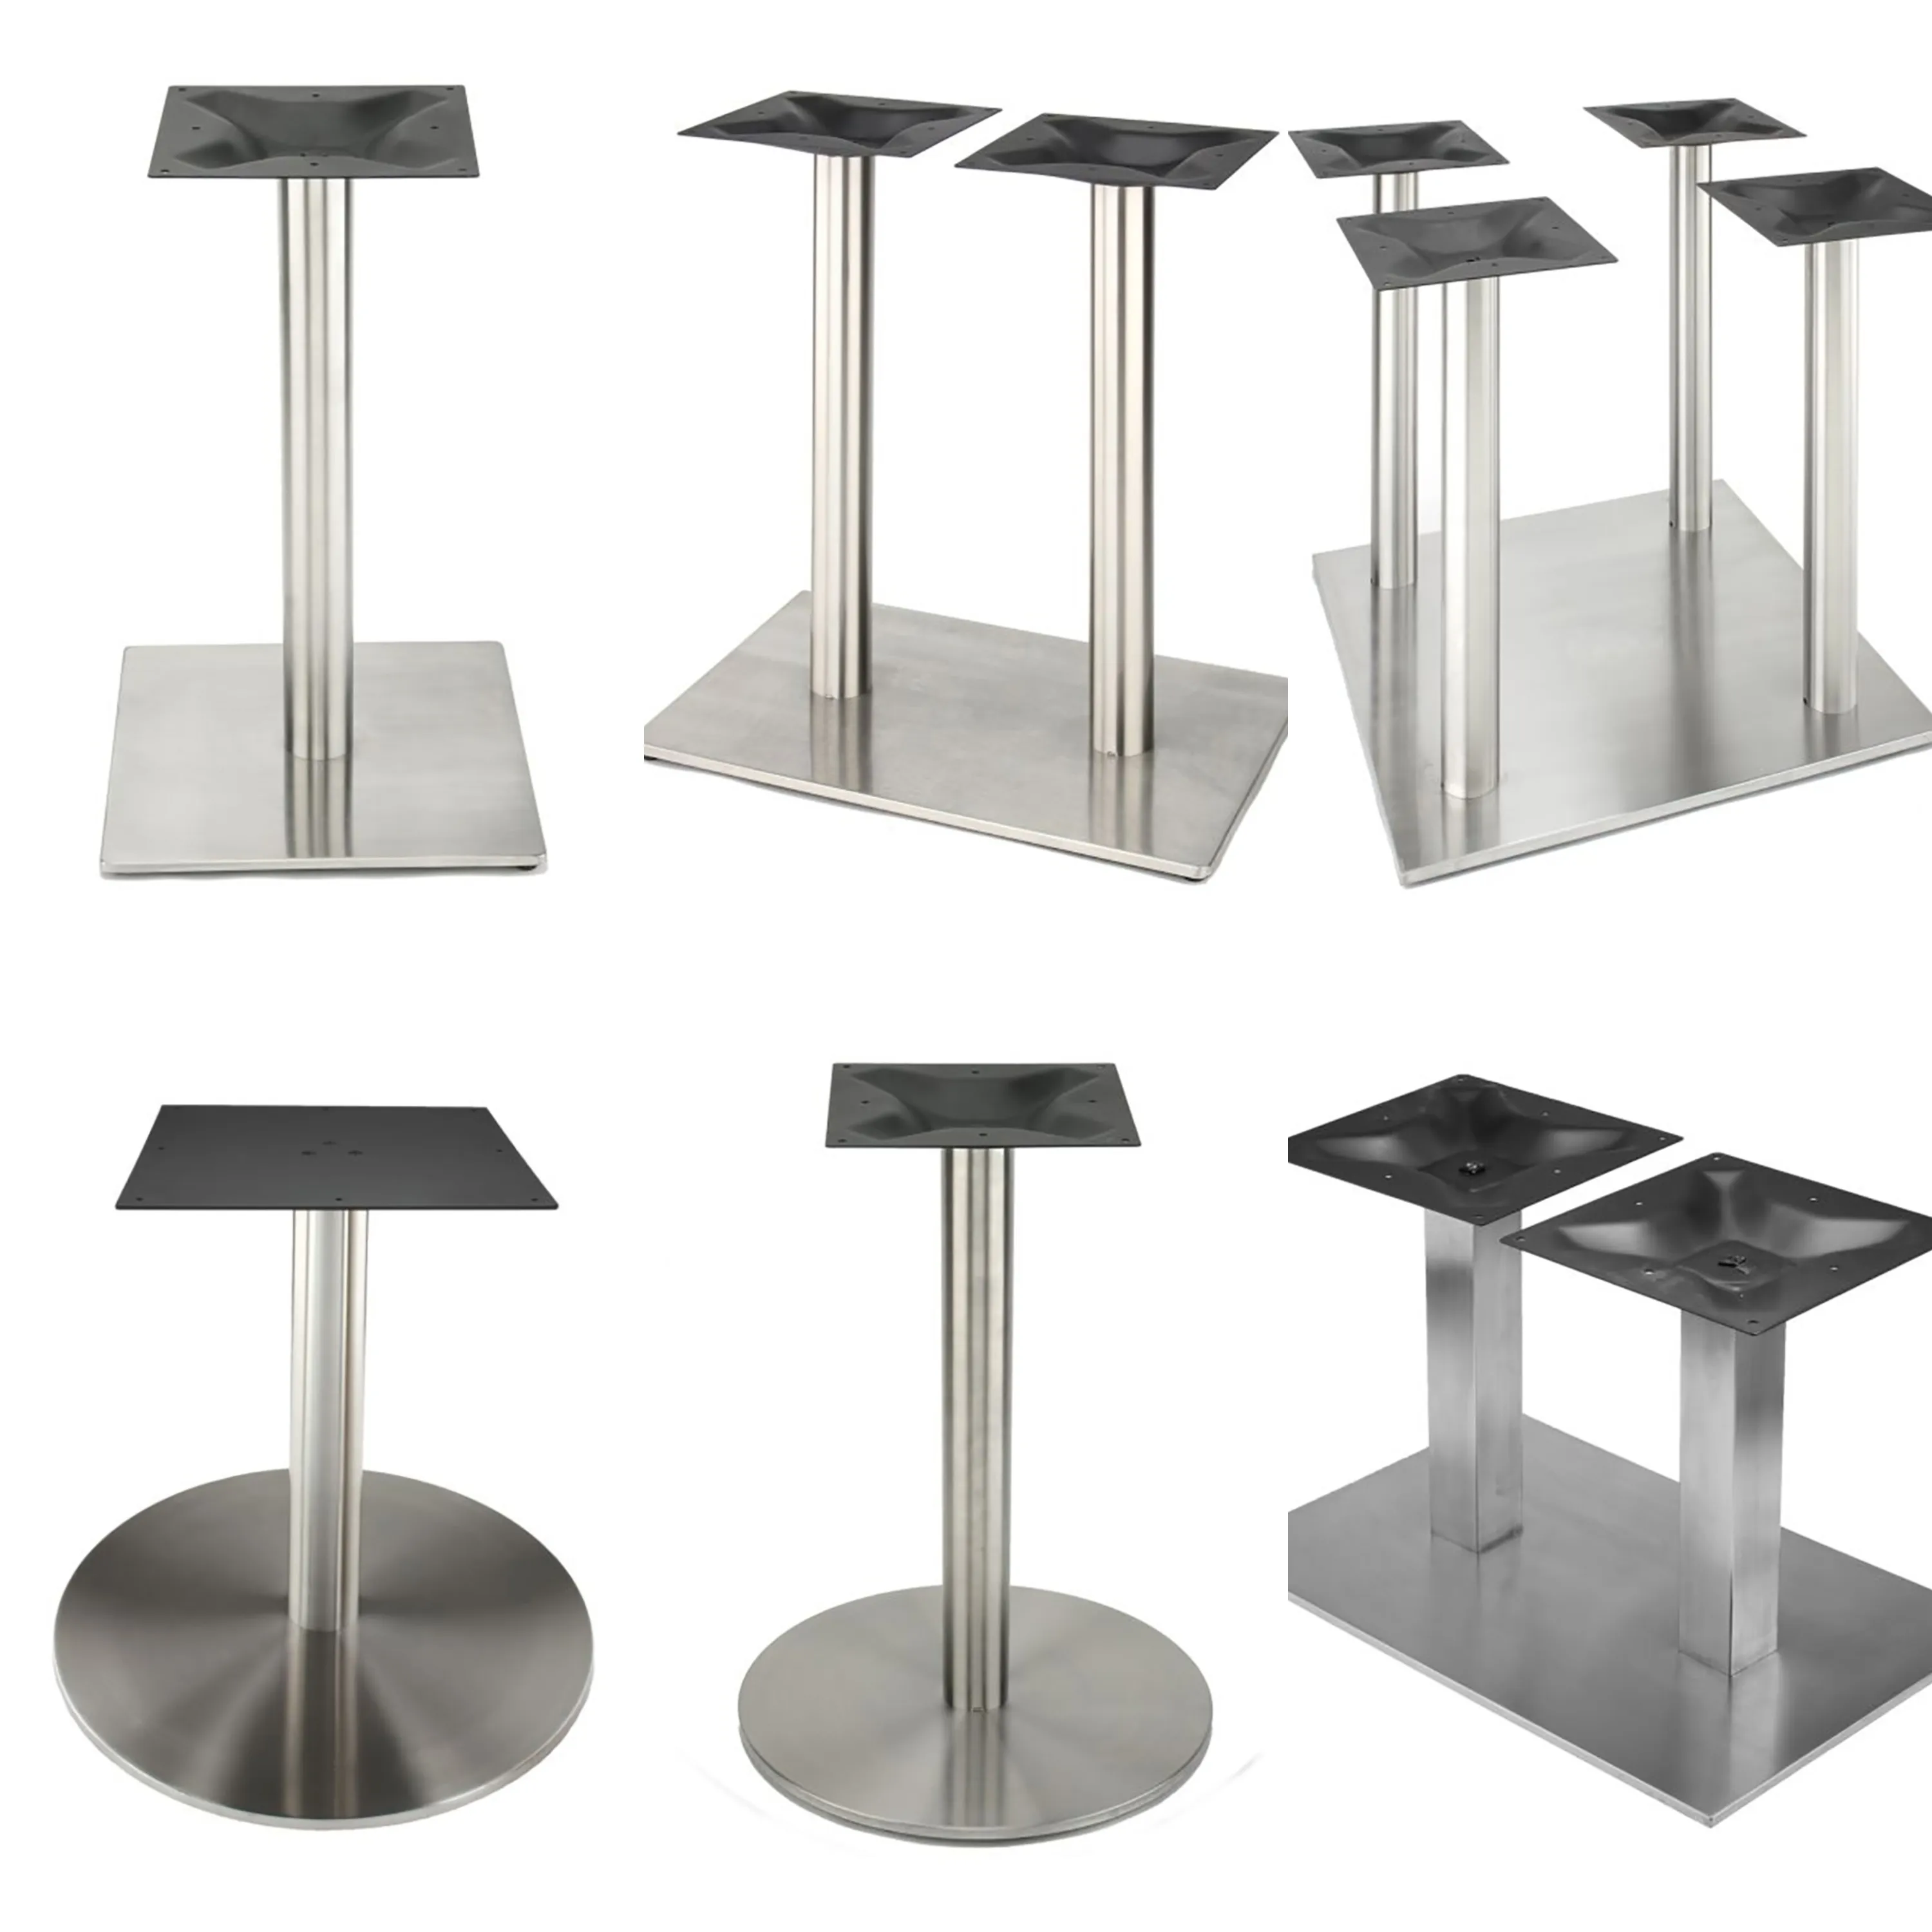 Folding Table Legs Furniture Stainless Frame Foldable Training Metal Billiard Coffee Dining Table Base For Glass Top